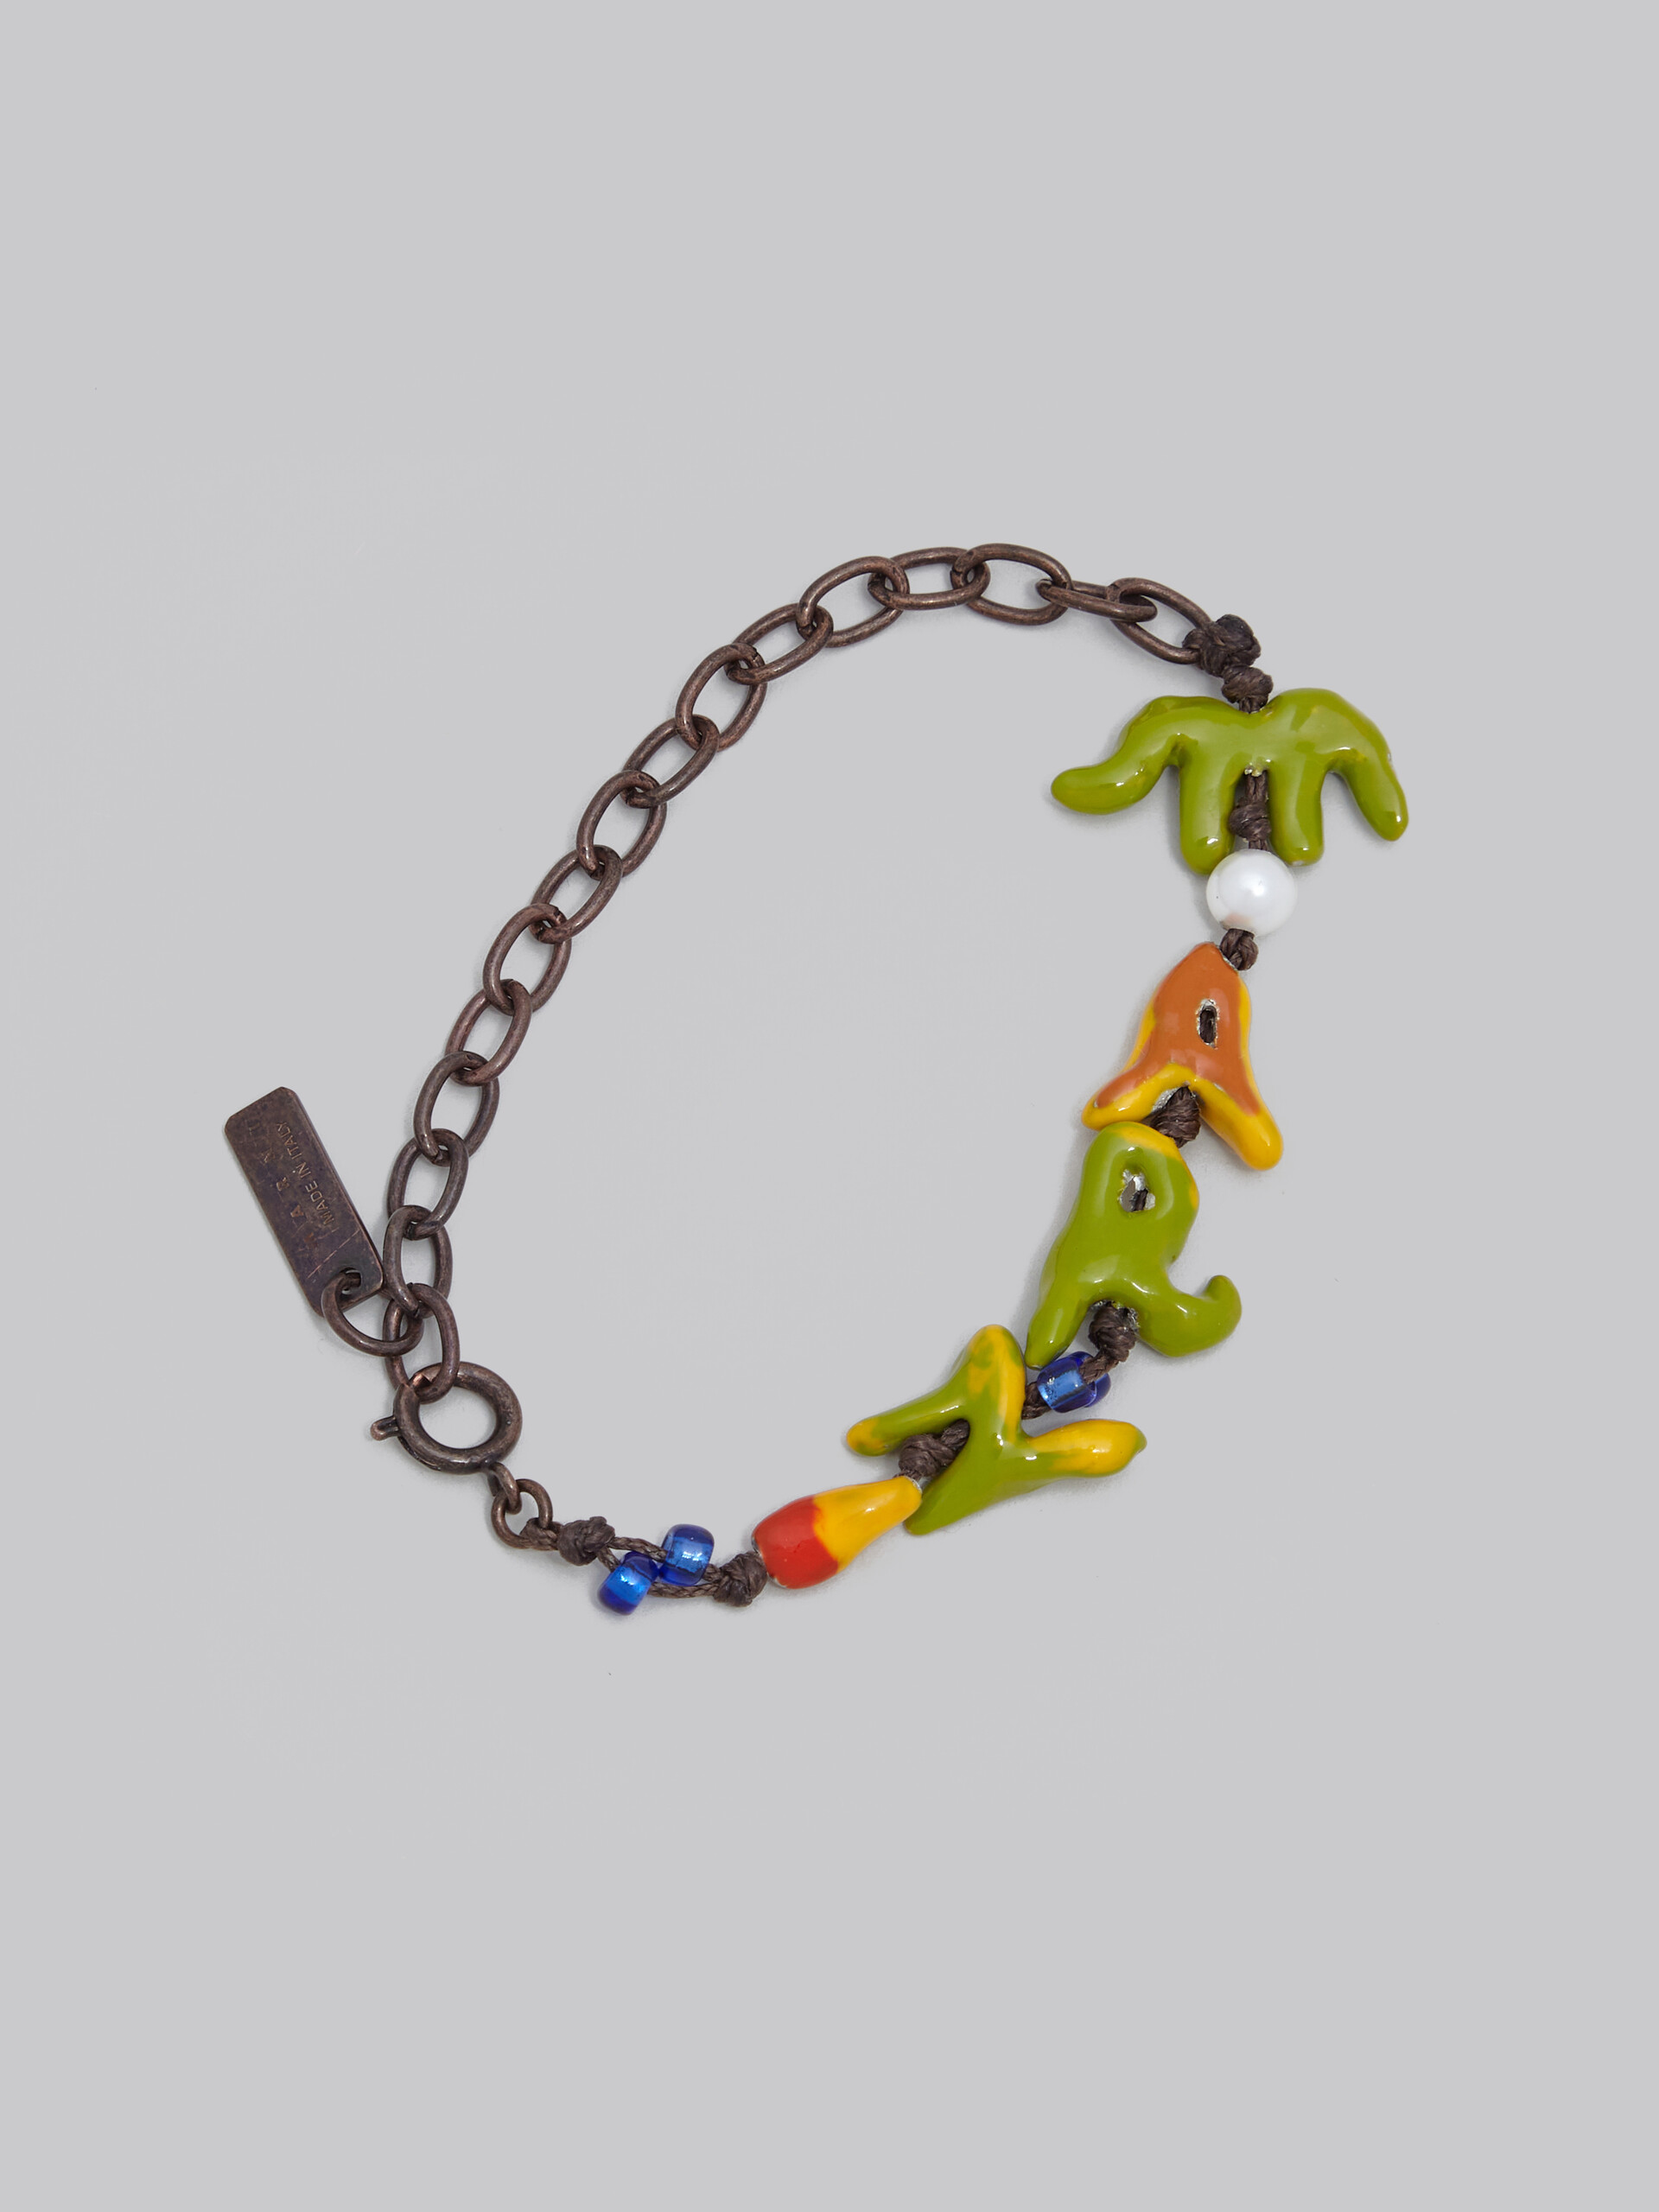 Marni x No Vacancy Inn - Bracelet with green red and yellow pendants - Bracelets - Image 3